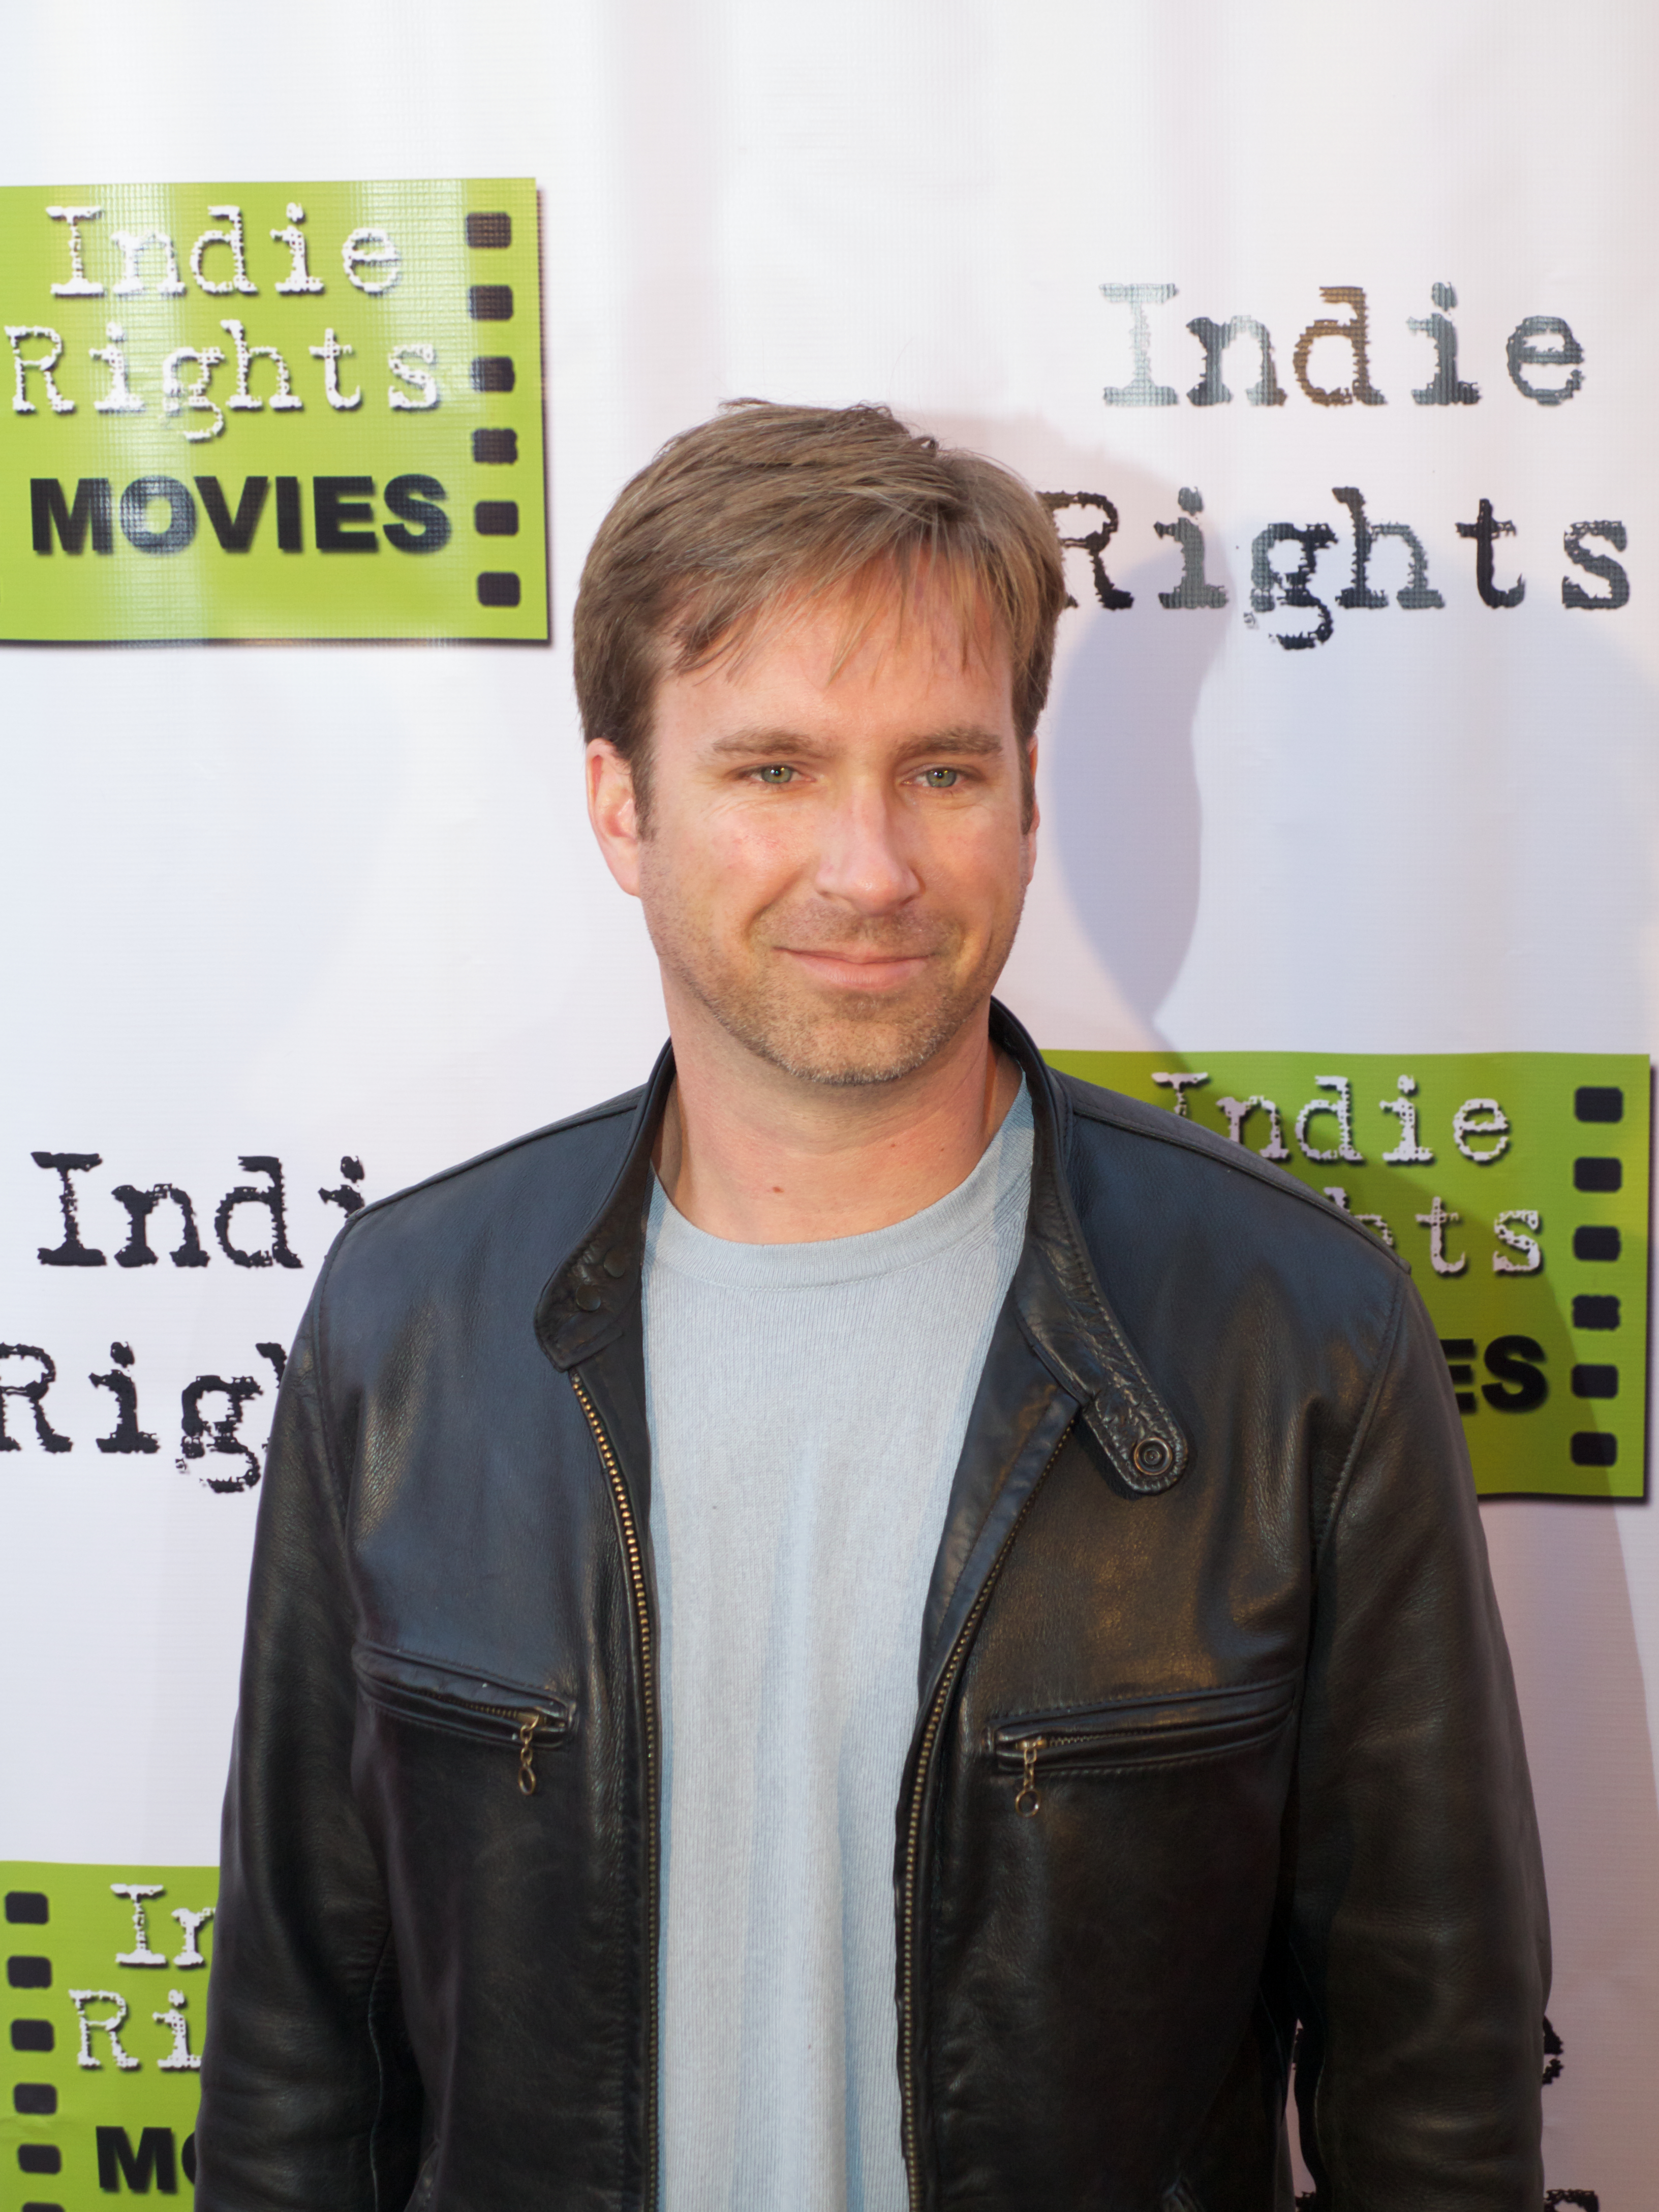 Actor Michael Madison at the premiere of Indie Rights film FRAY.